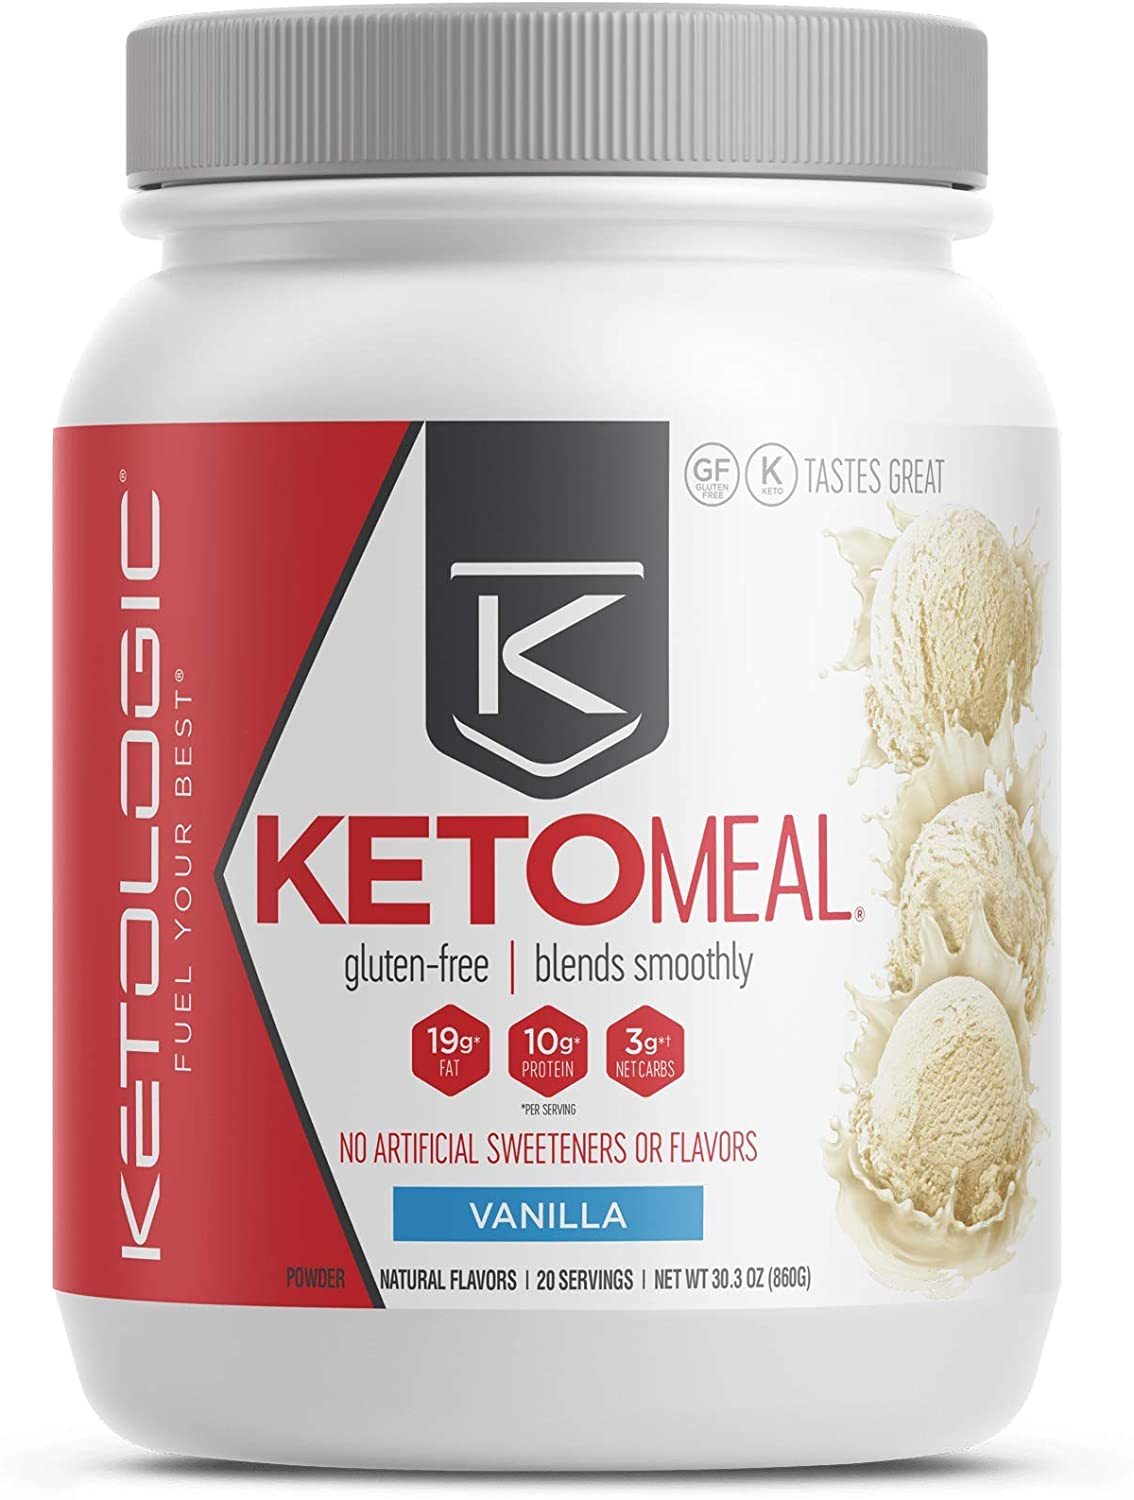 Primary image for KETOLOGIC Meal Replacement KETO MEAL Vanilla Gluten-Free 20 servings net.wt. 31.